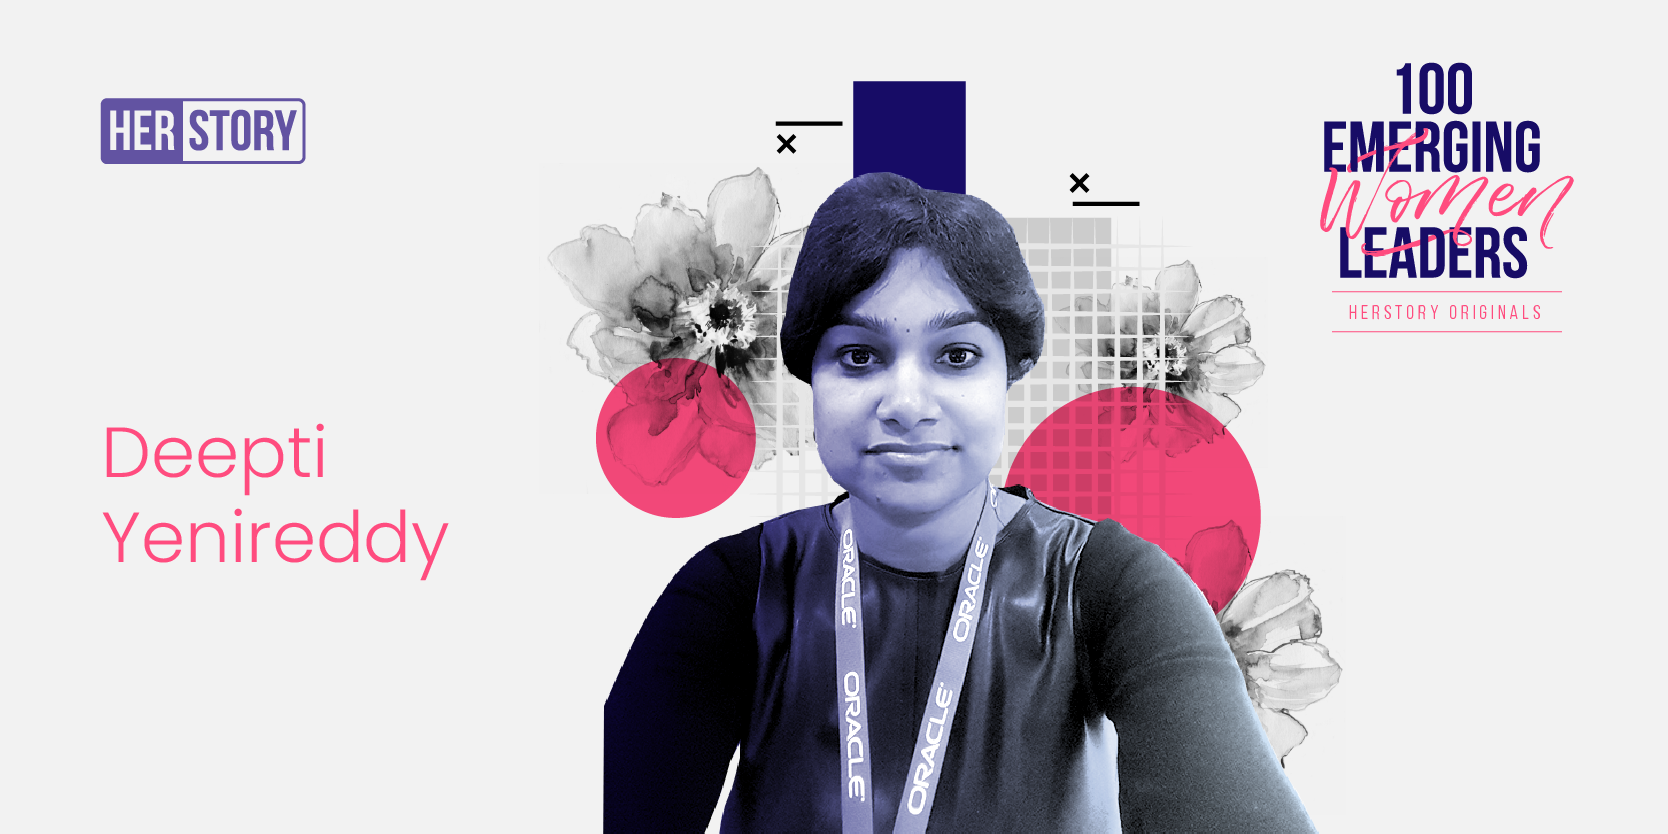 [100 Emerging Women Leaders] From working in oil fields to starting up, how Deepti Yenireddy found her passion for tech 